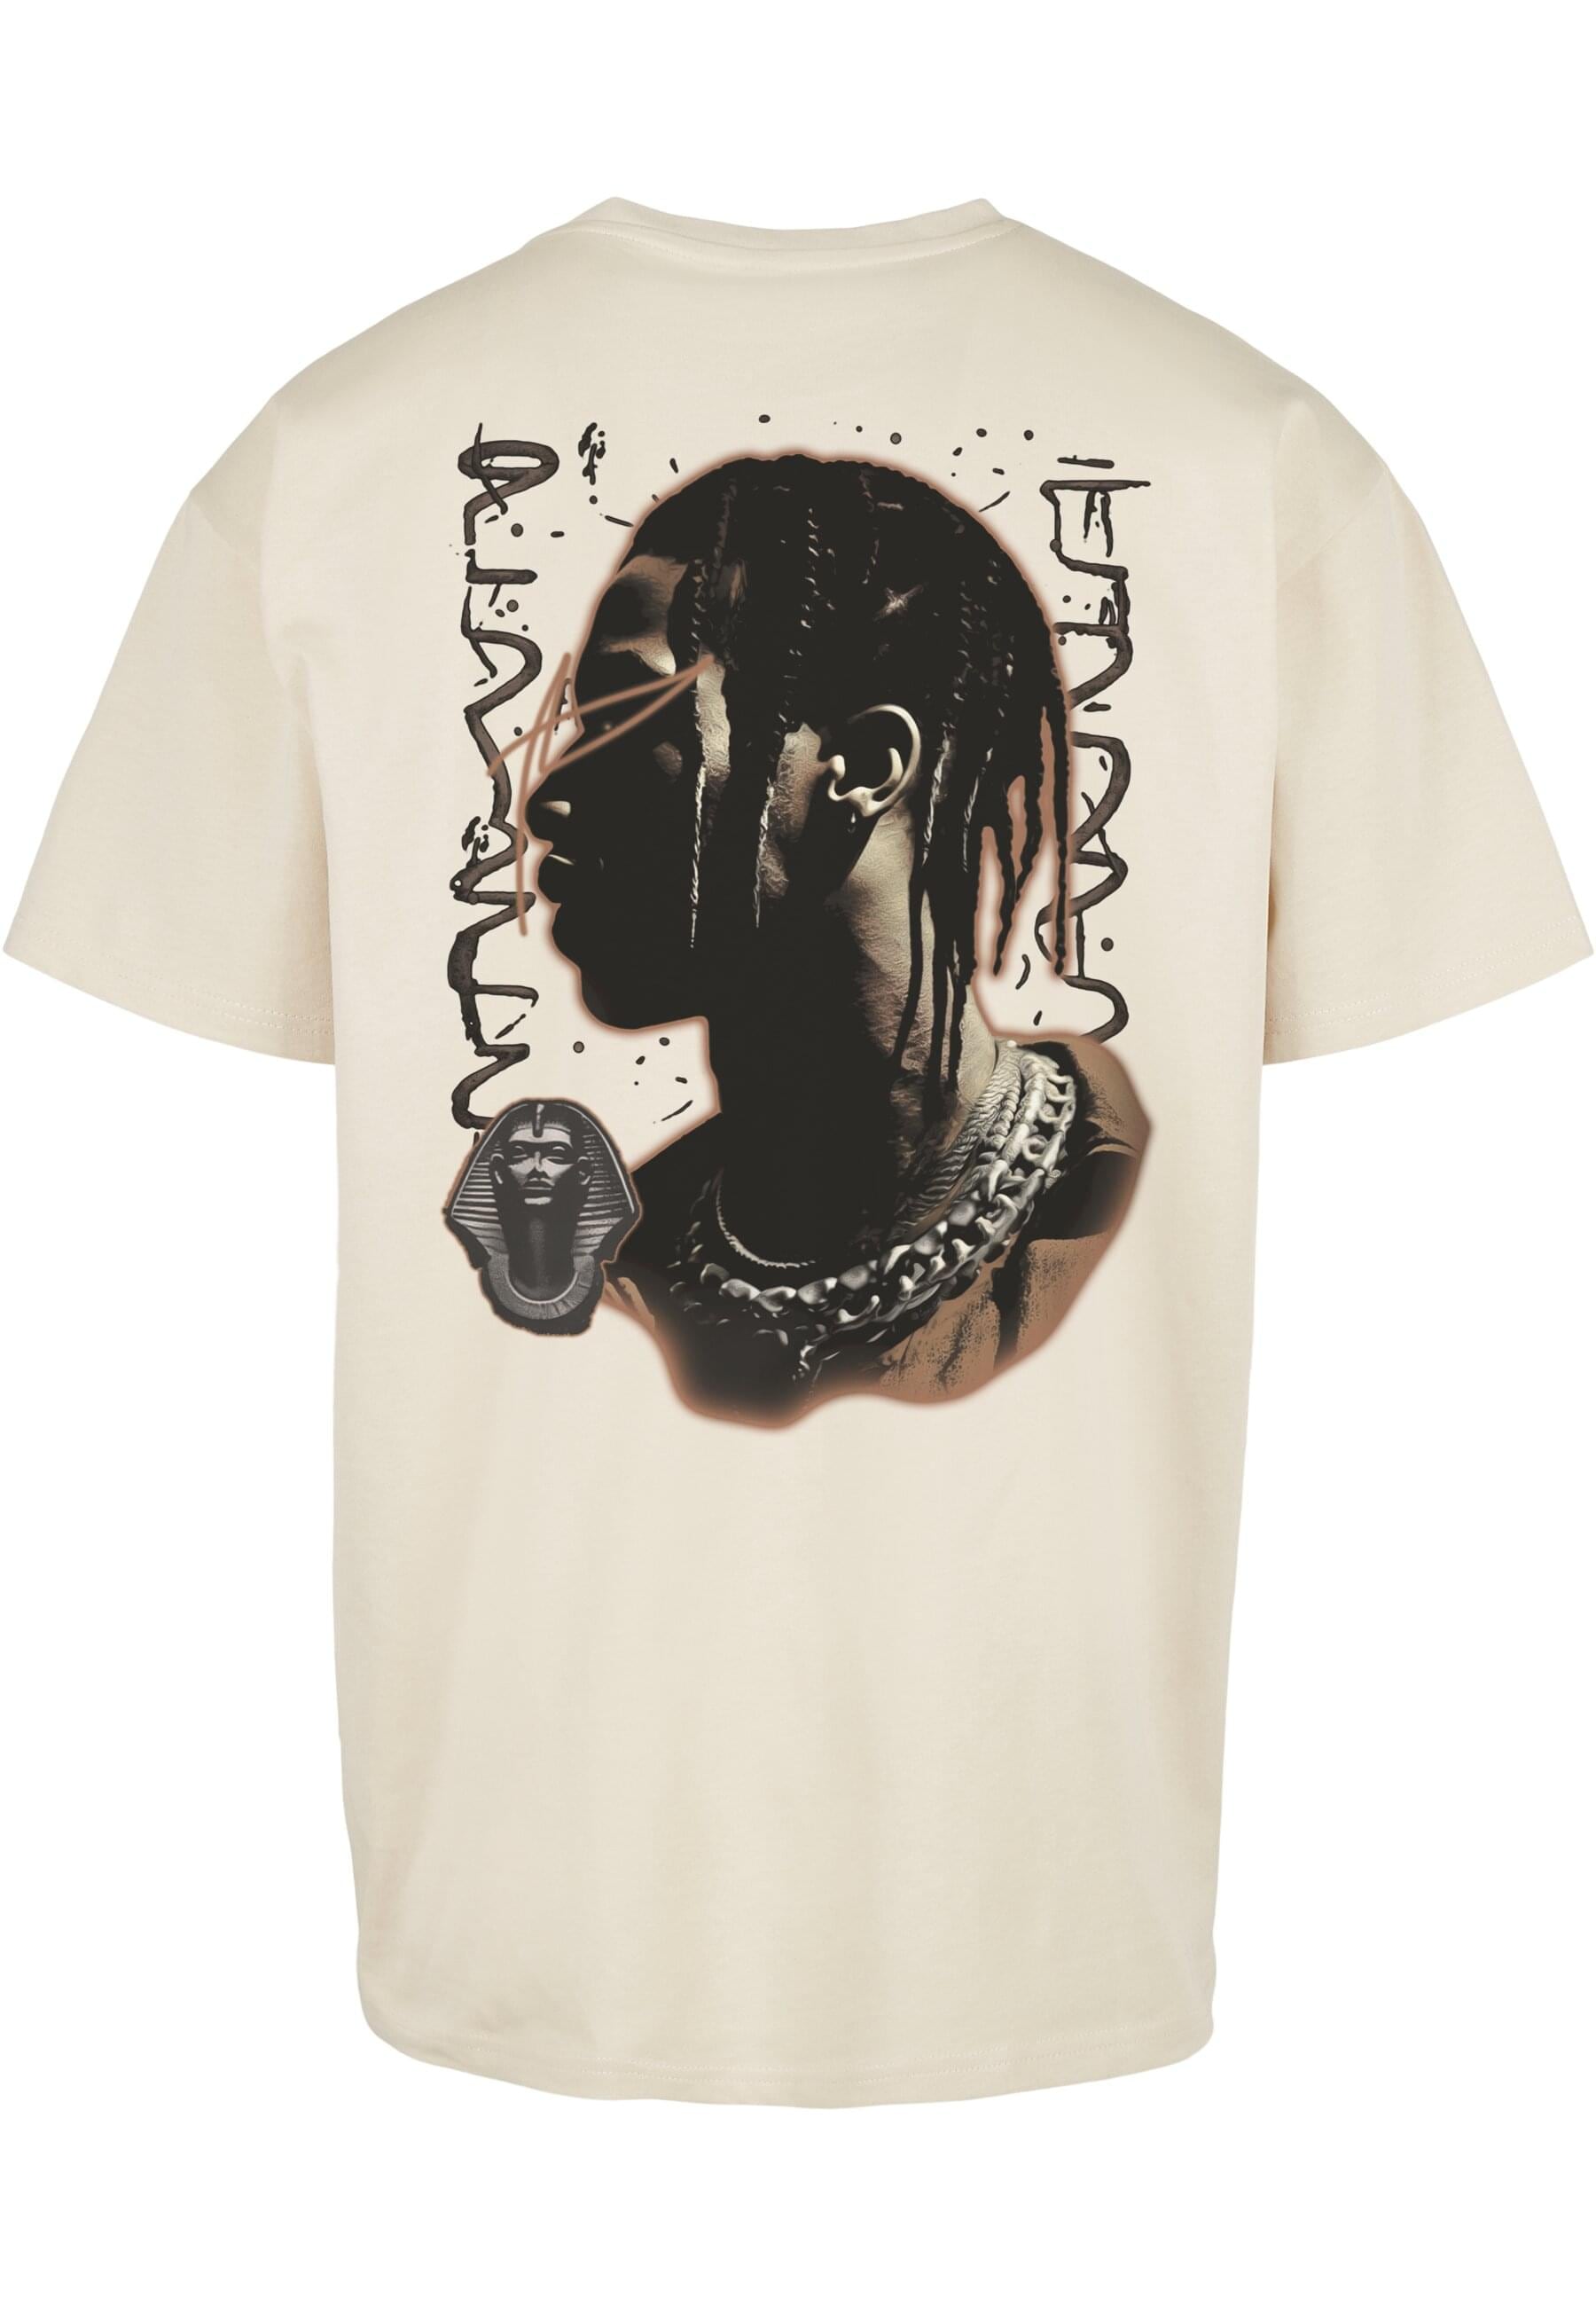 Upscale by Mister Tee T-Shirt »Upscale by Mister Tee Herren Giza Oversize Tee«, (1 tlg.)